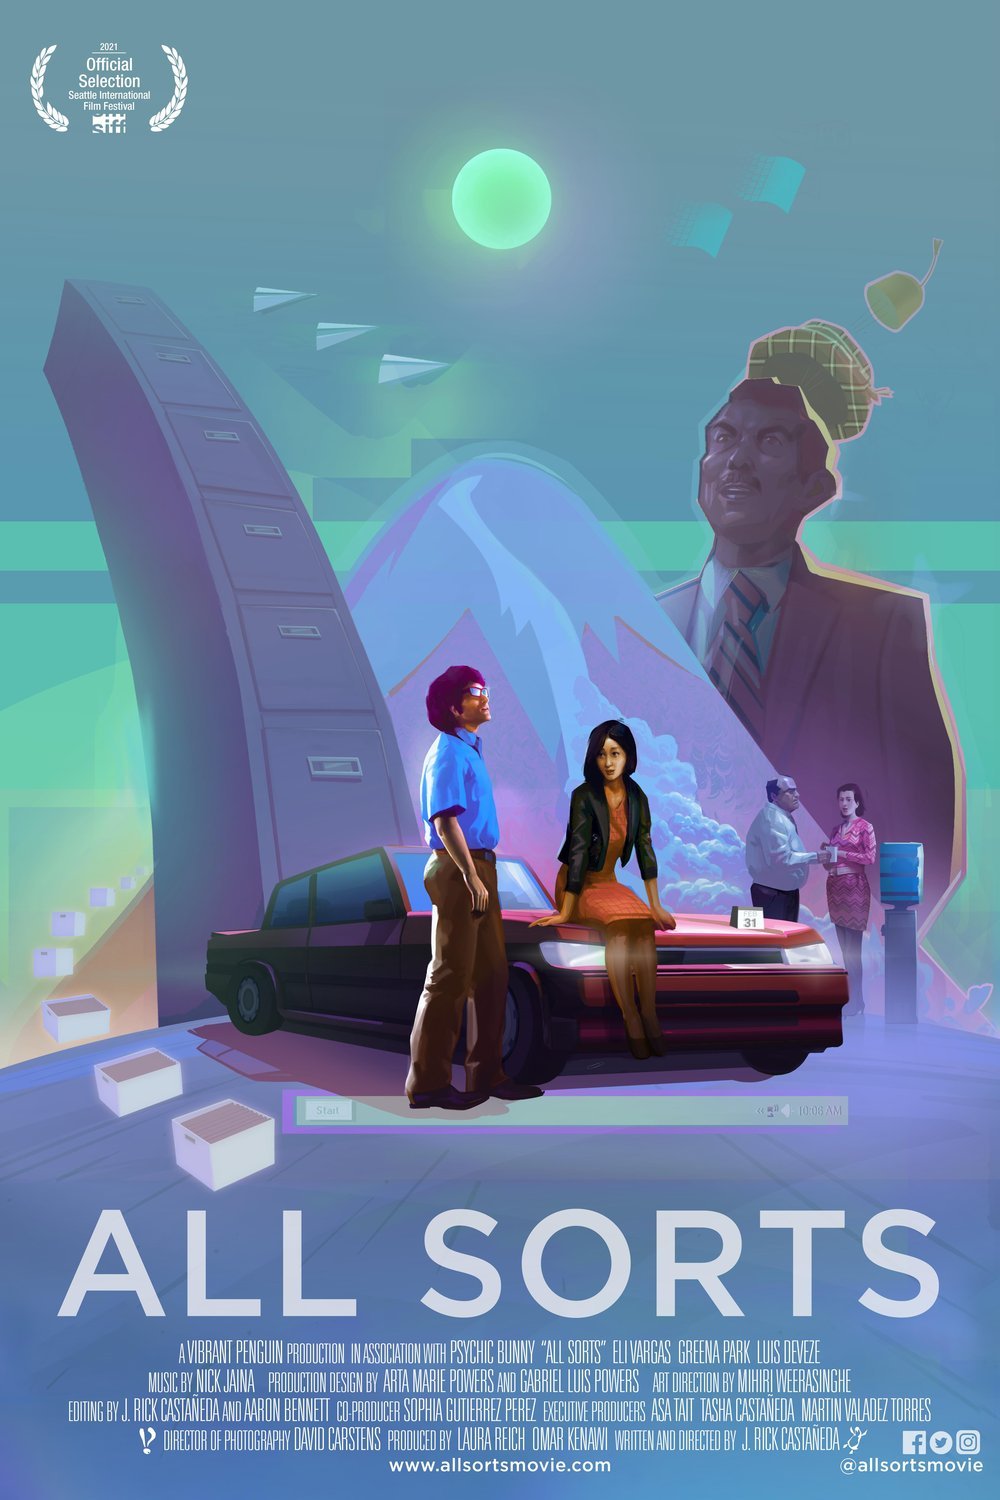 Poster of the movie All Sorts